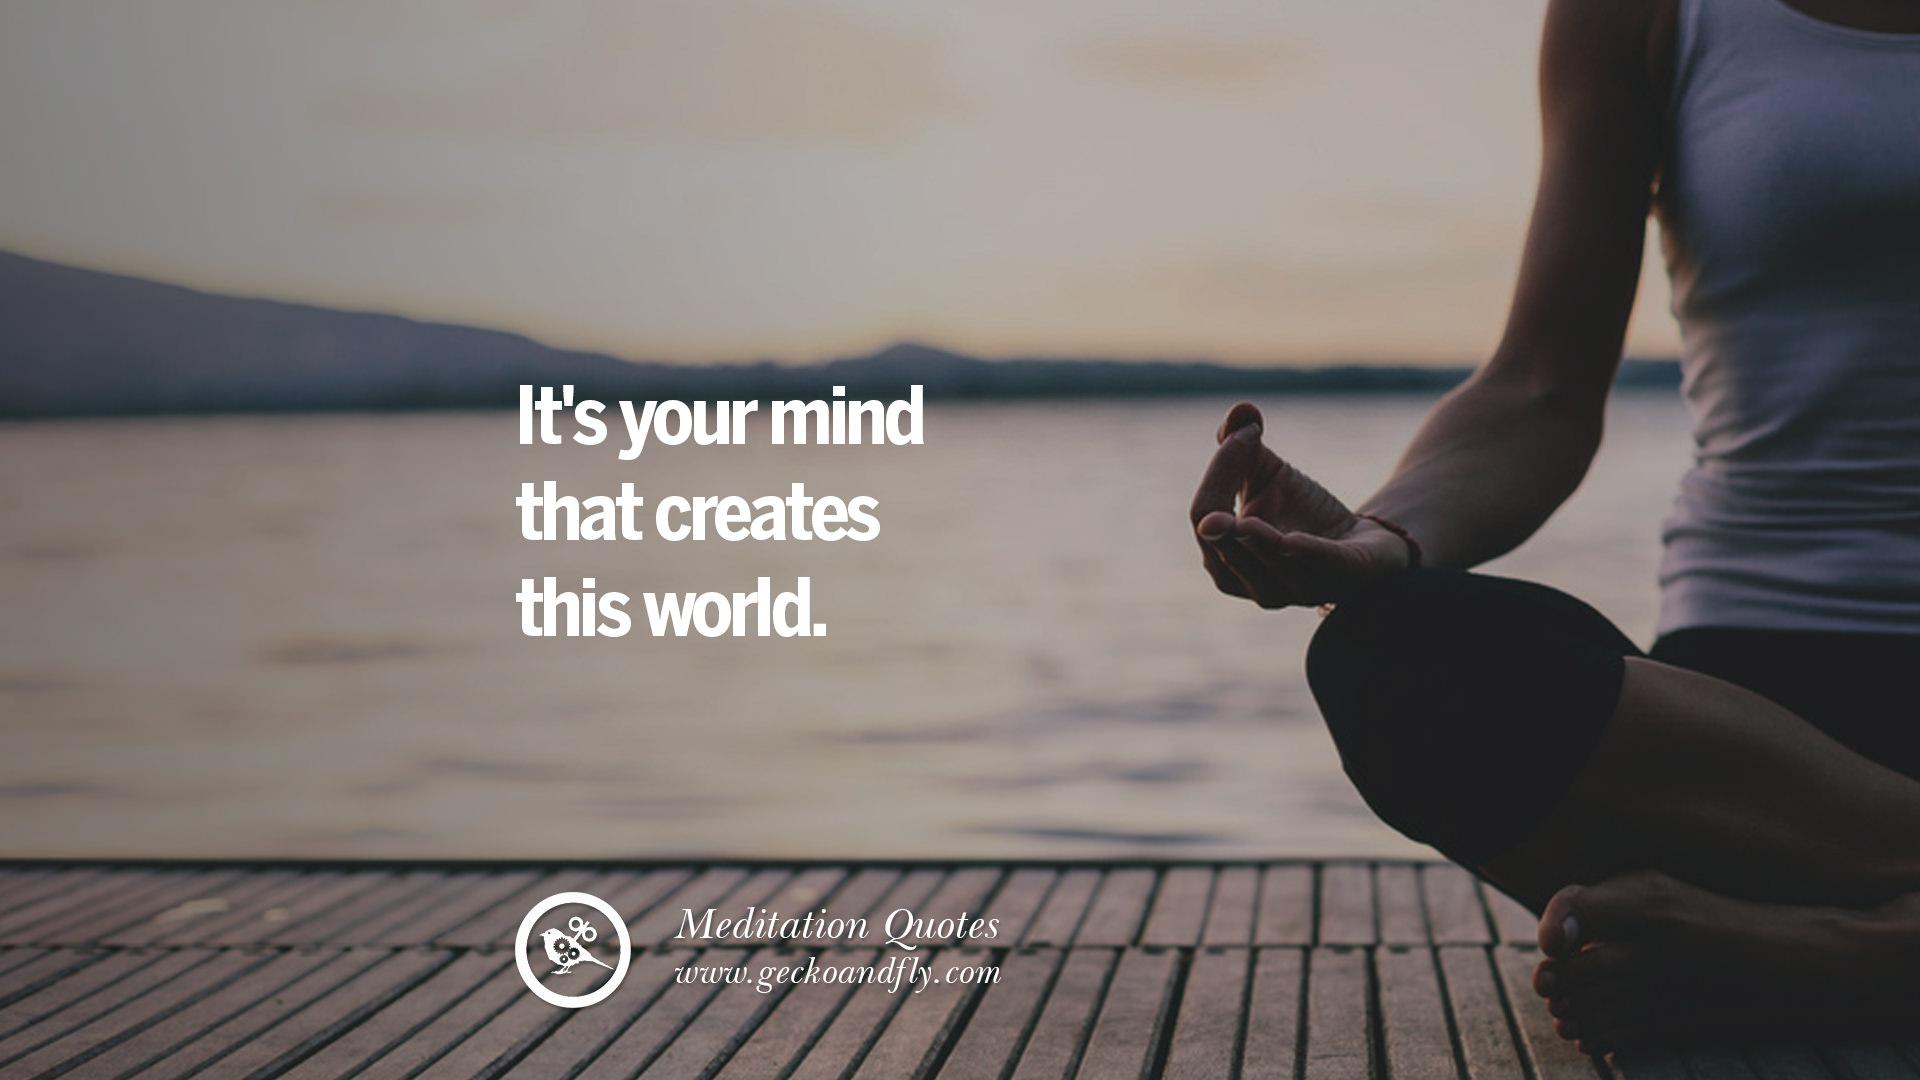 36 Quotes On Mindfulness Meditation For Yoga, Sleeping, And Healing